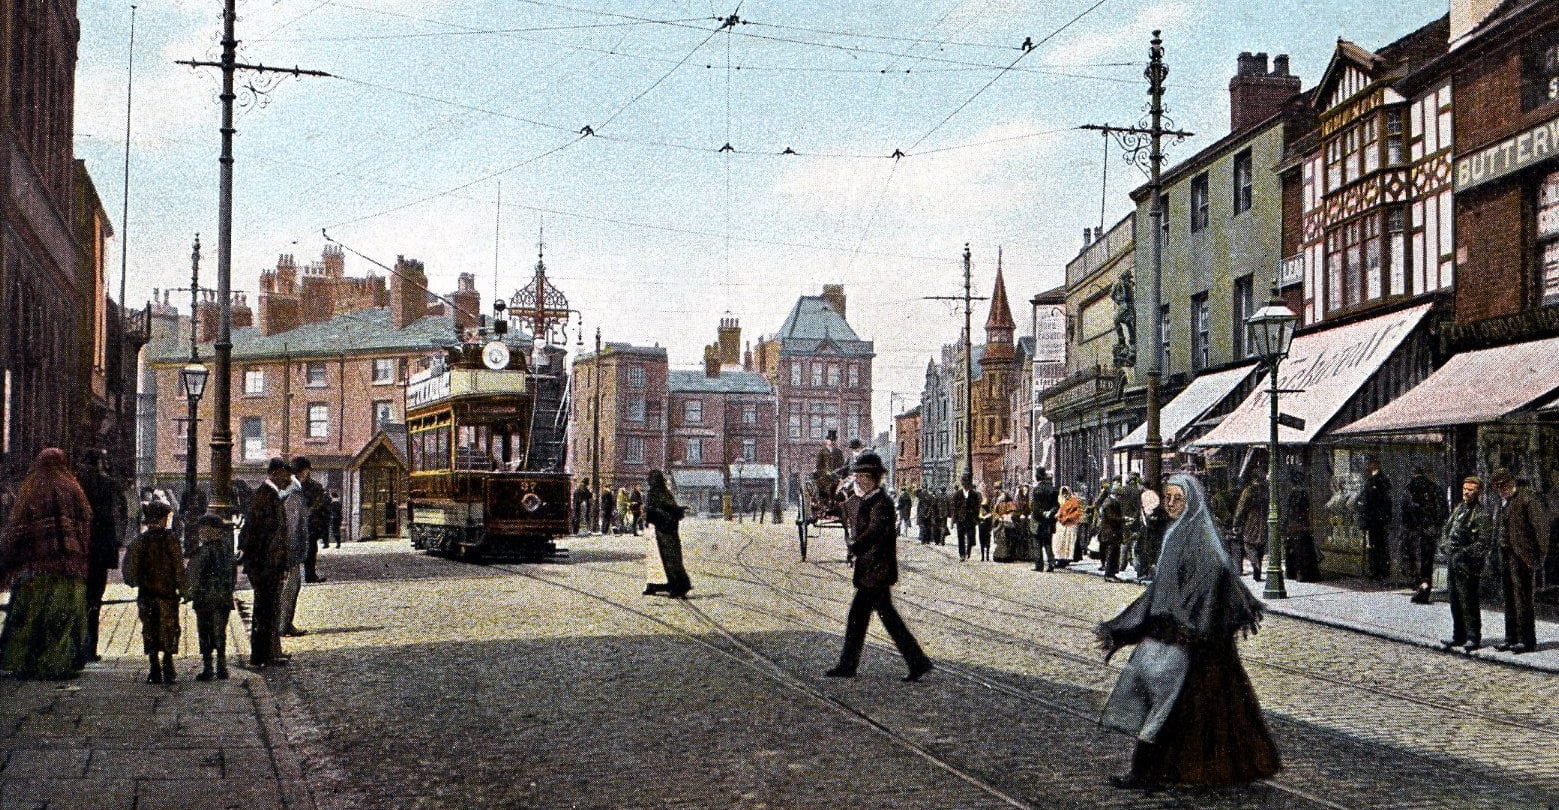 Re-colorized photograph of Market Street in Oldham during the Victorian era